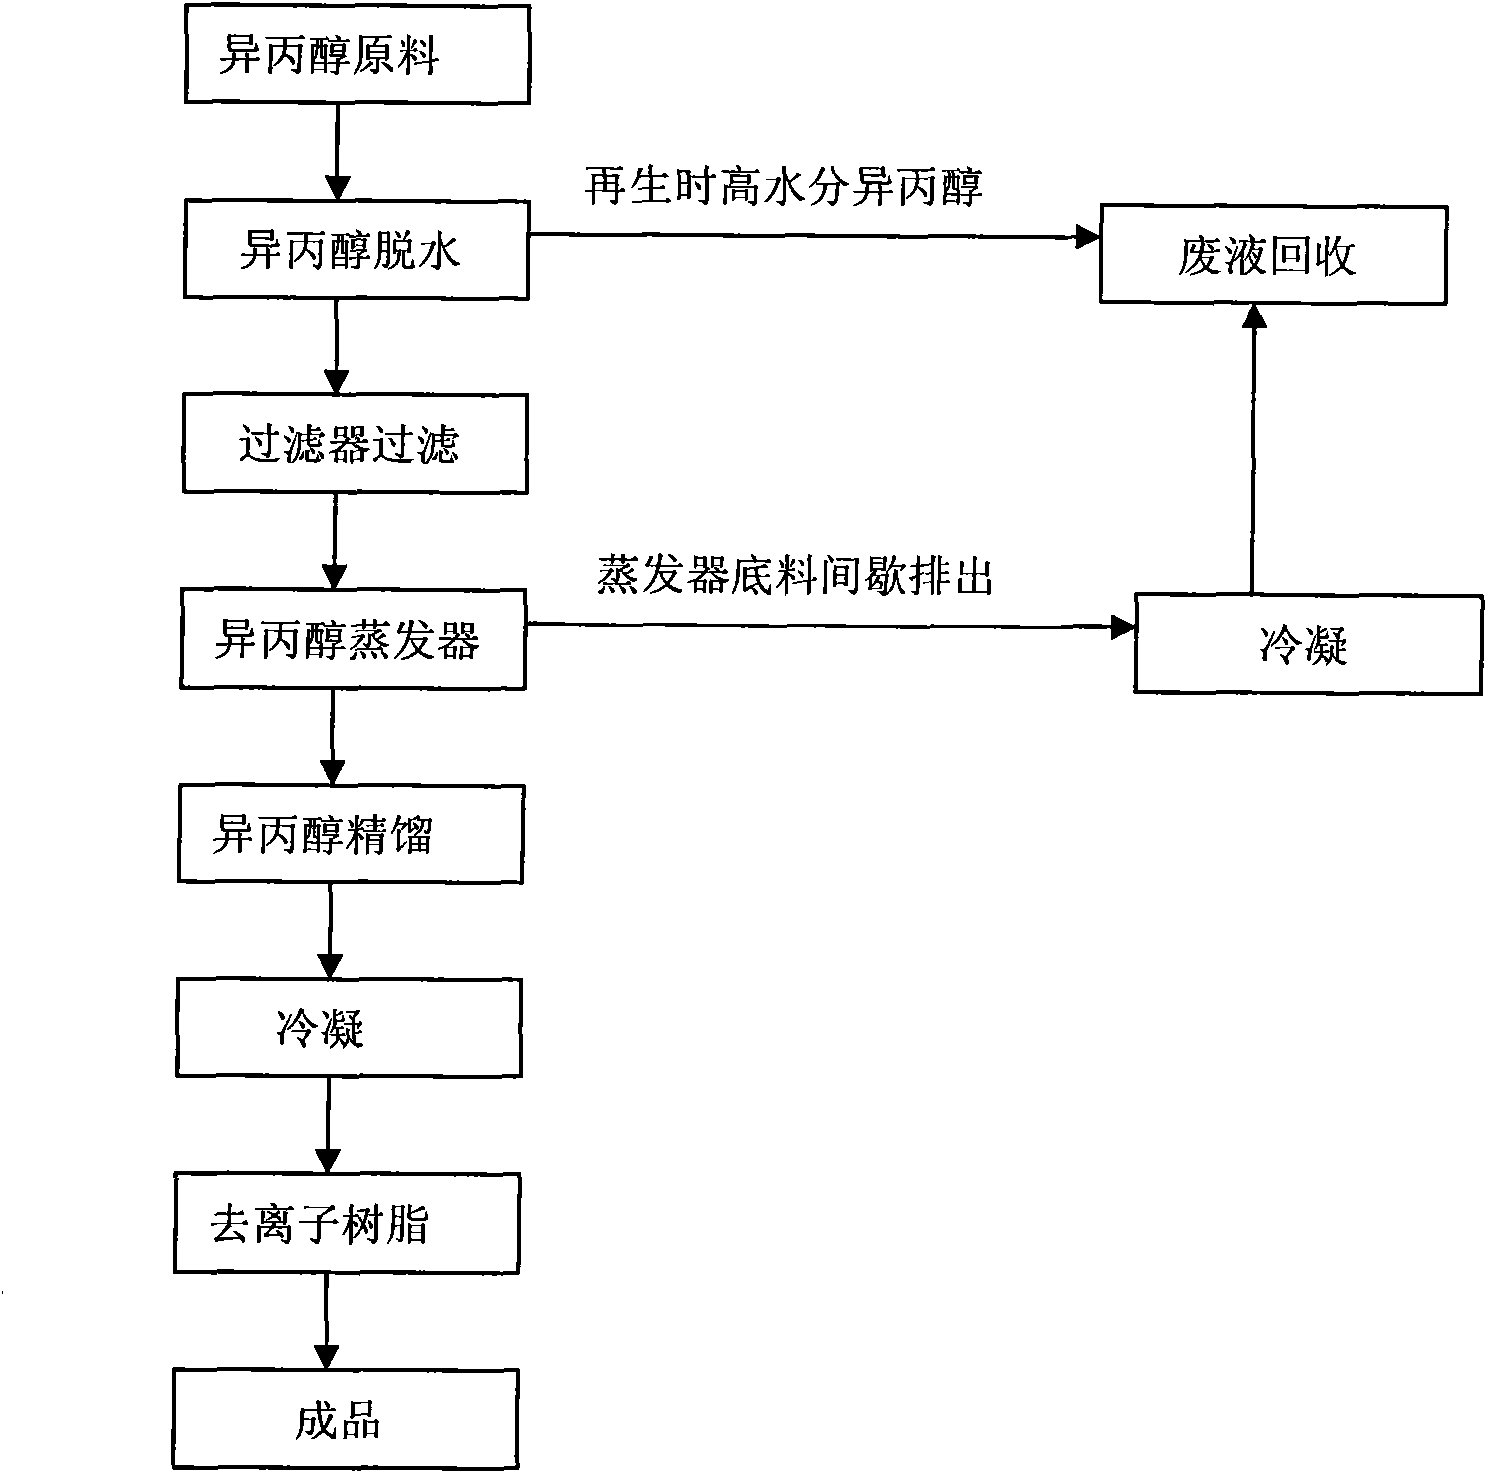 Production process of ultra-high-purity isopropanol